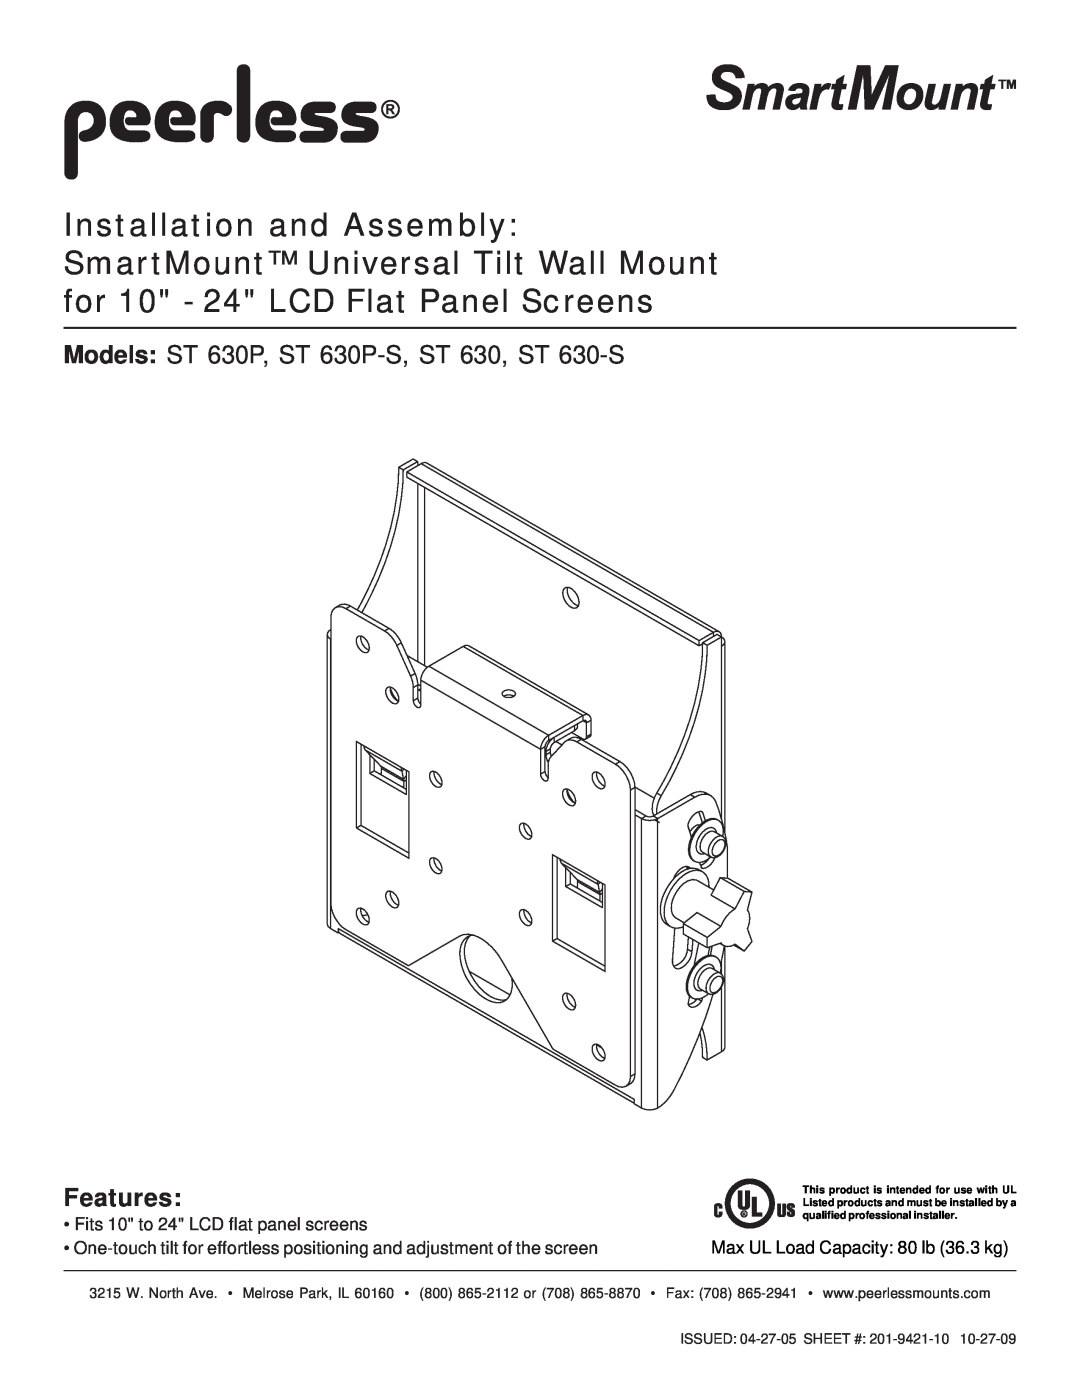 Peerless Industries ST630P-S manual Features, Models ST 630P, ST 630P-S,ST 630, ST 630-S, ISSUED 04-27-05SHEET # 